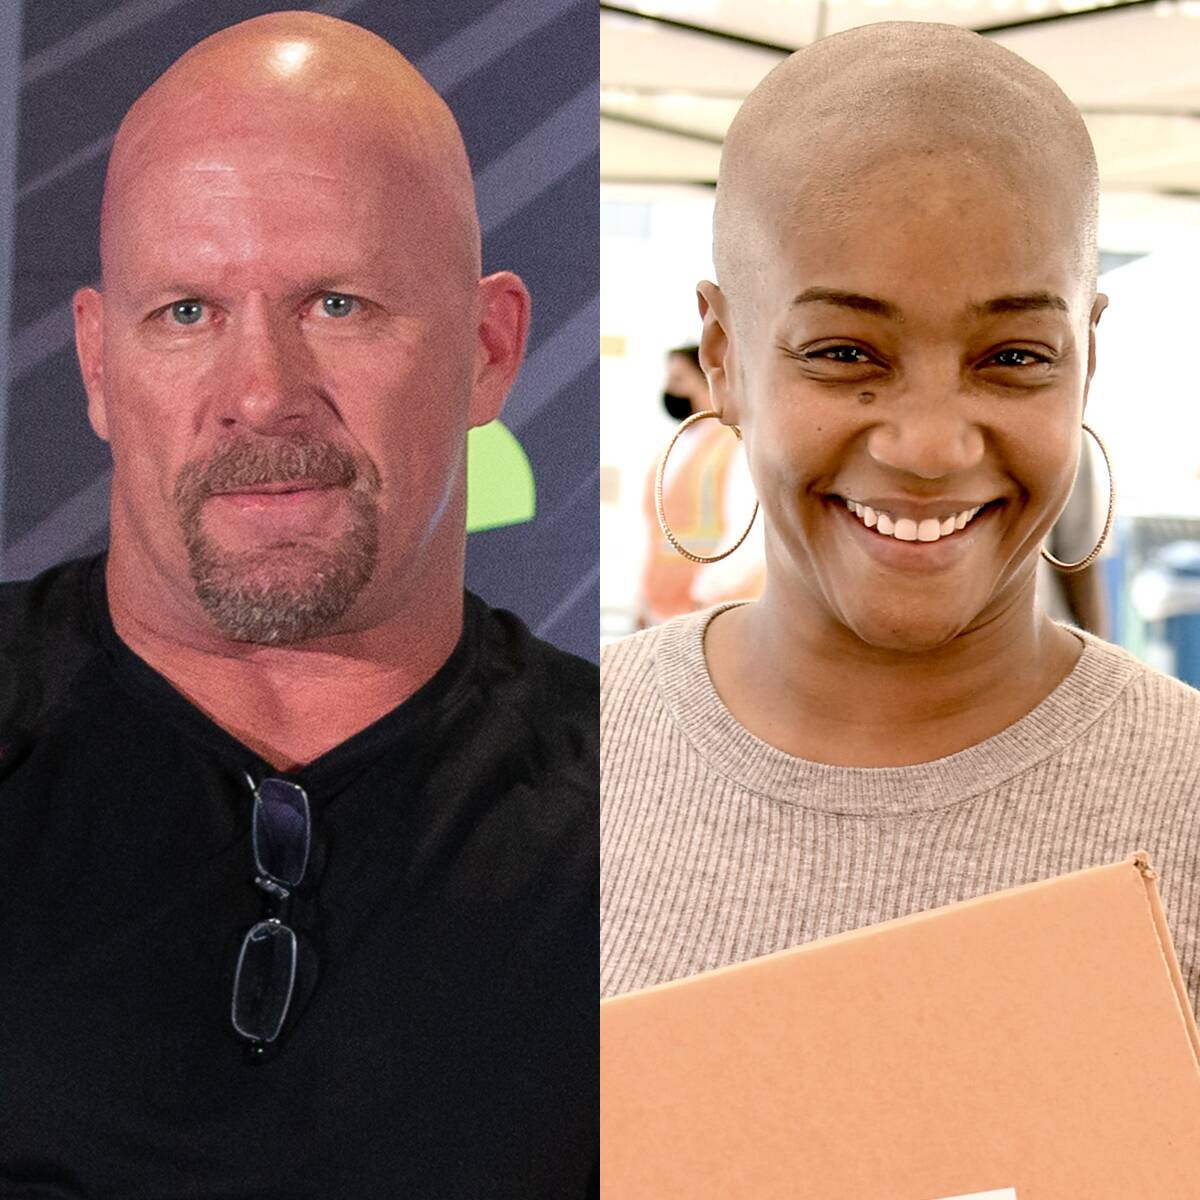 That Time Tiffany Haddish and Steve Austin Bonded Over Bald Heads, Boats & More